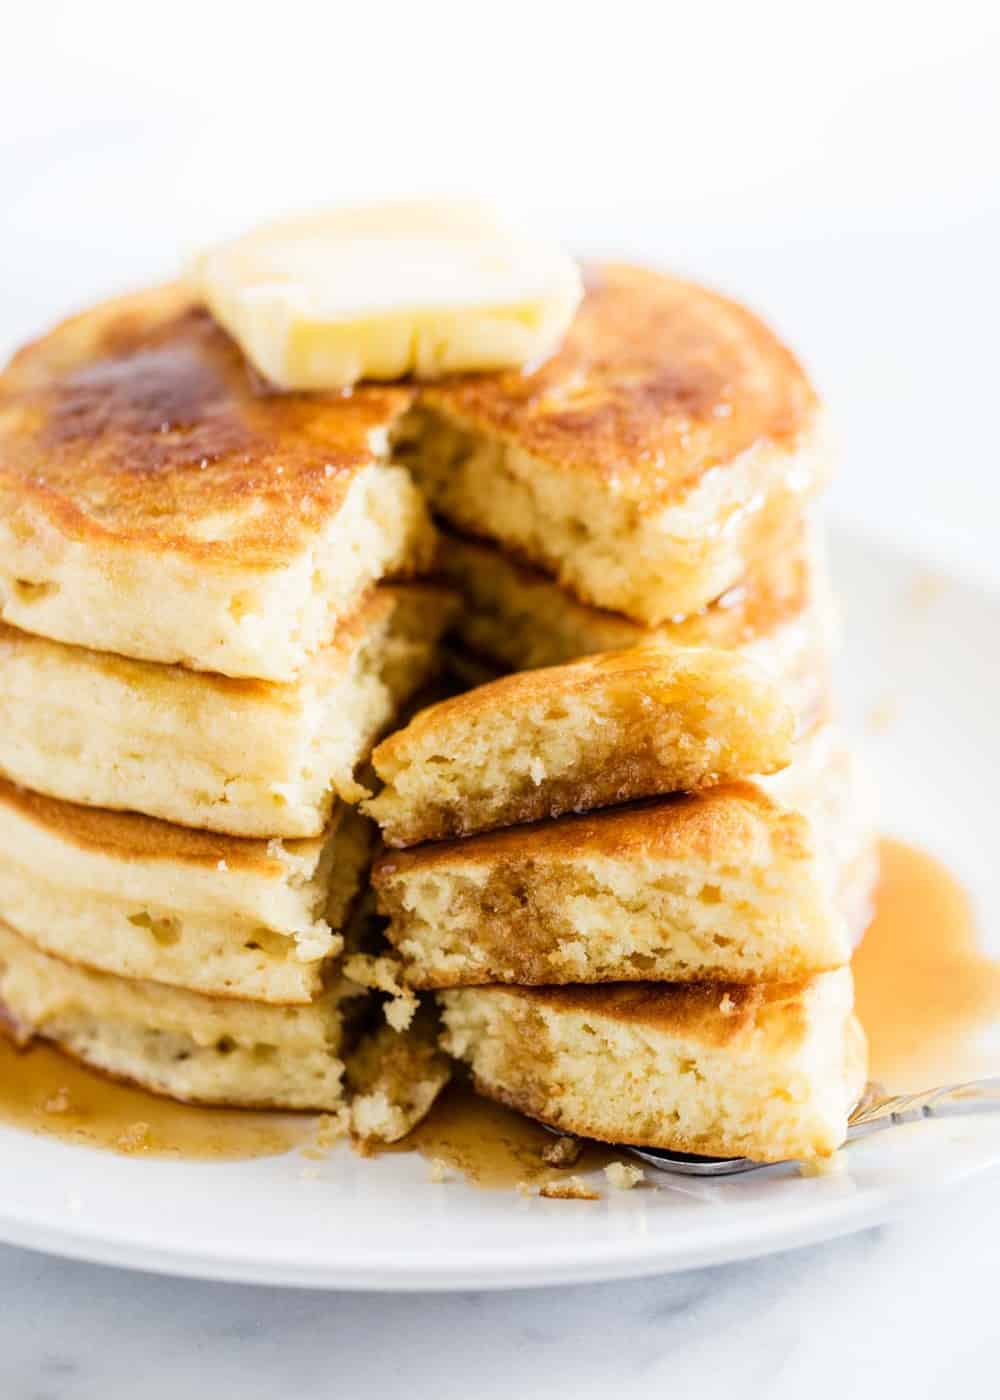 Cutting into stack of buttermilk pancakes with a fork.